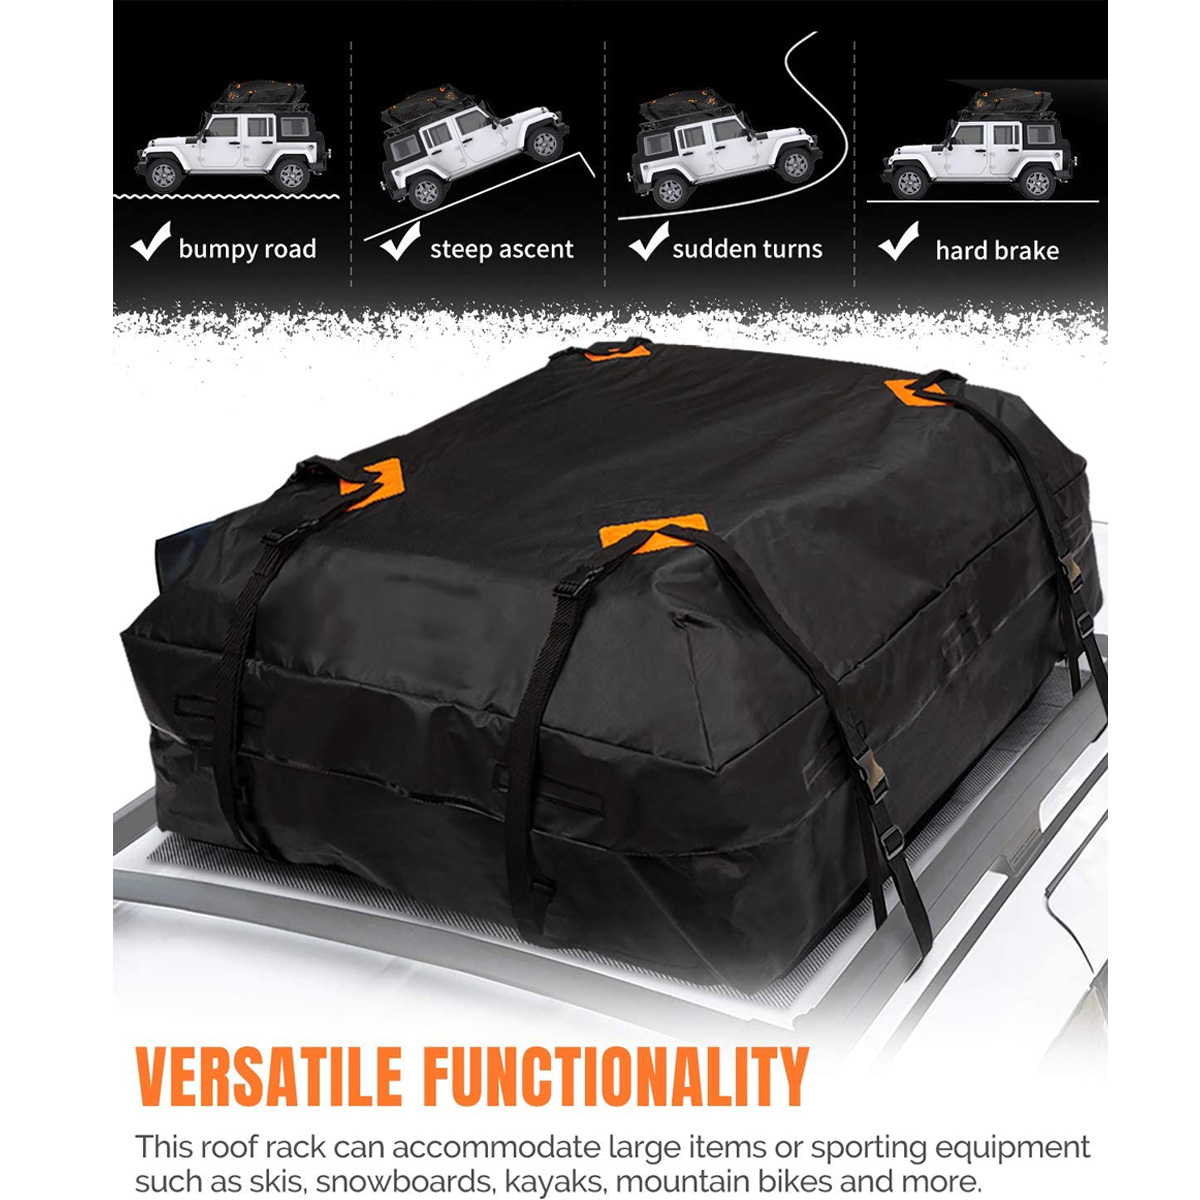 475L-Car-Rooftop-Cargo-Bag-420D-Waterproof-Car-Top-Carrier-Bag-Luggage-Storage-for-Outdoor-Travel-Ca-1888699-4